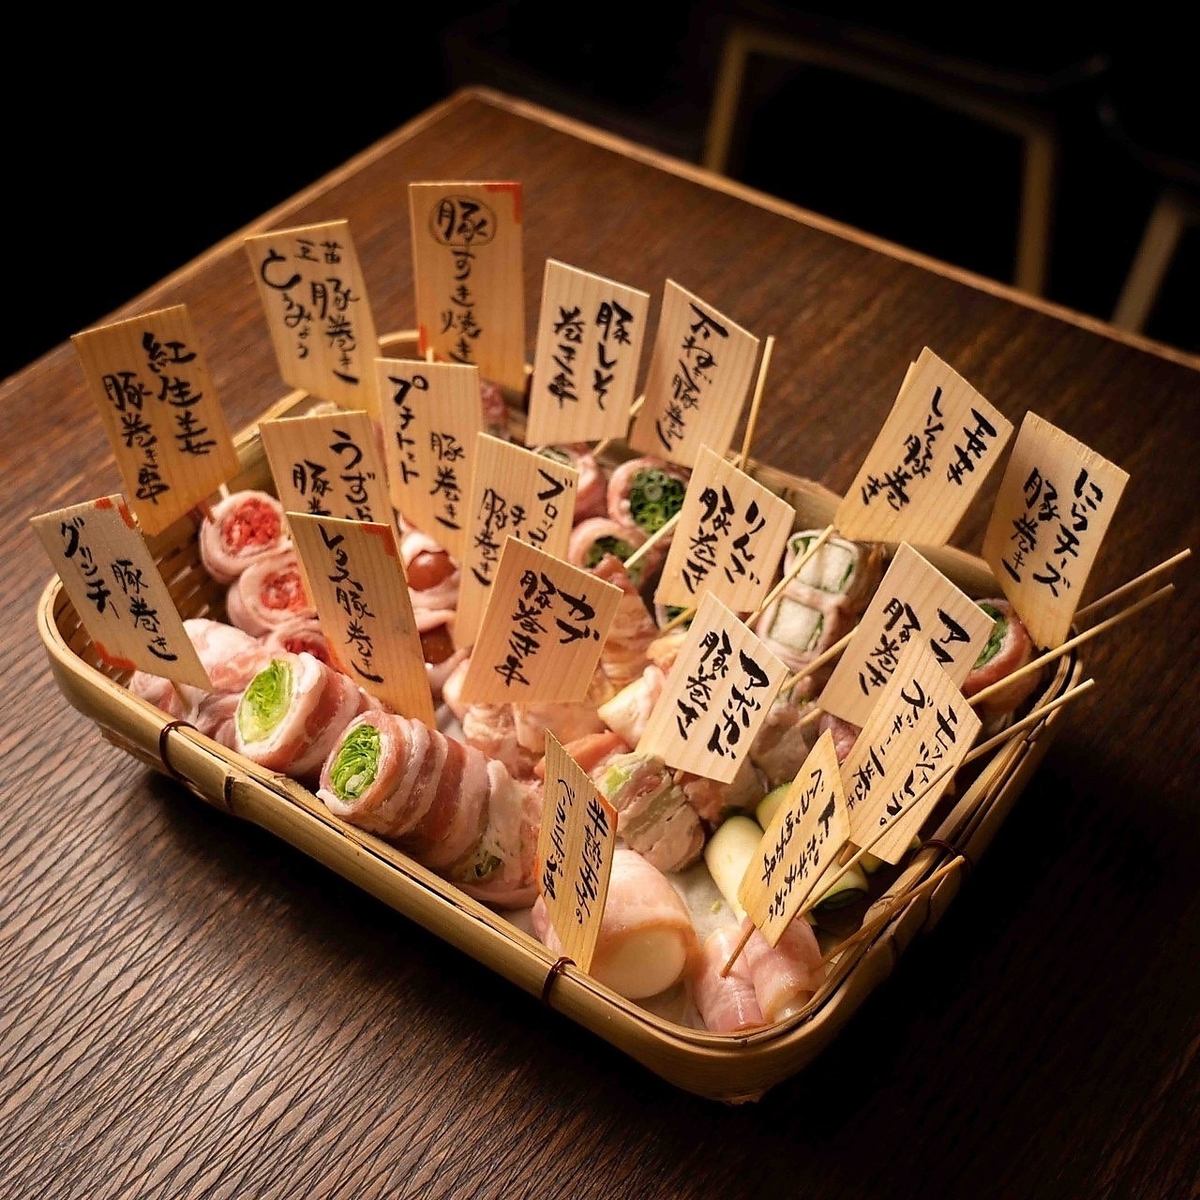 Vegetable roll skewers and yakitori are very popular! Terrace seats are also available ◎